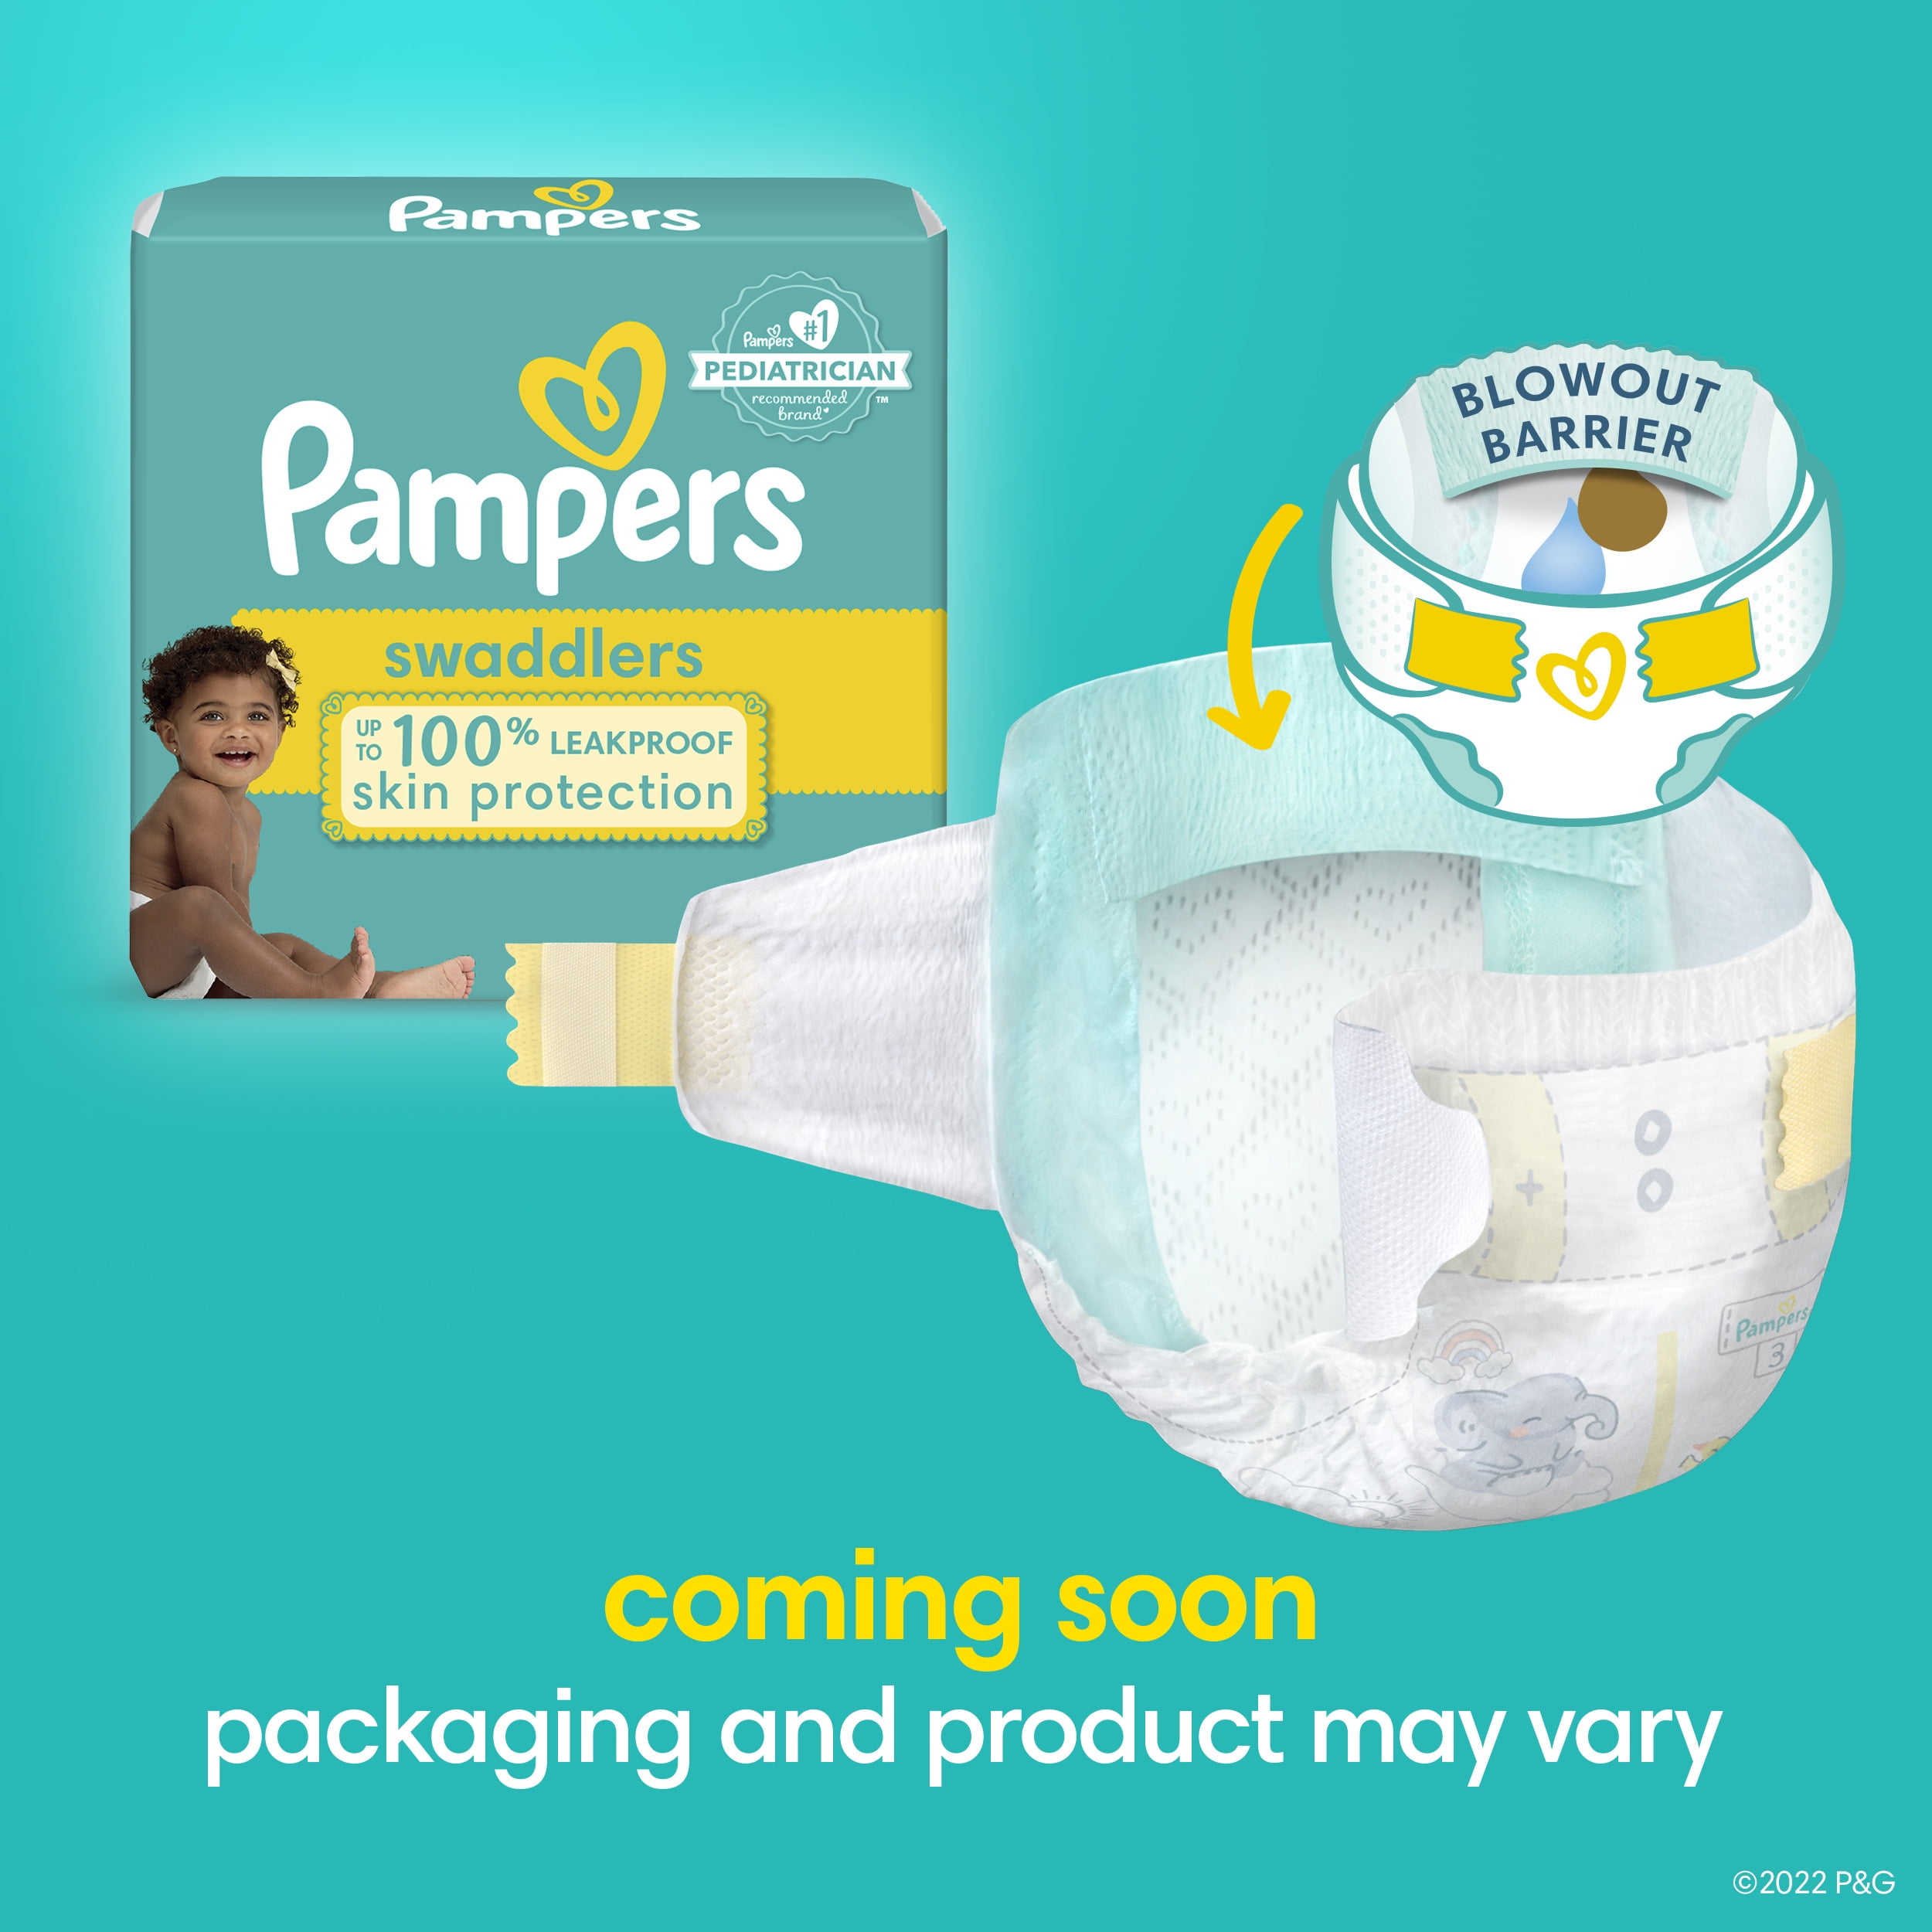 Diapers Newborn/Size 1 (8-14 lb), 96 Count - Pampers Swaddlers Disposable  Baby Diapers, Super Pack (Packaging May Vary) 96 Count (Pack of 1)